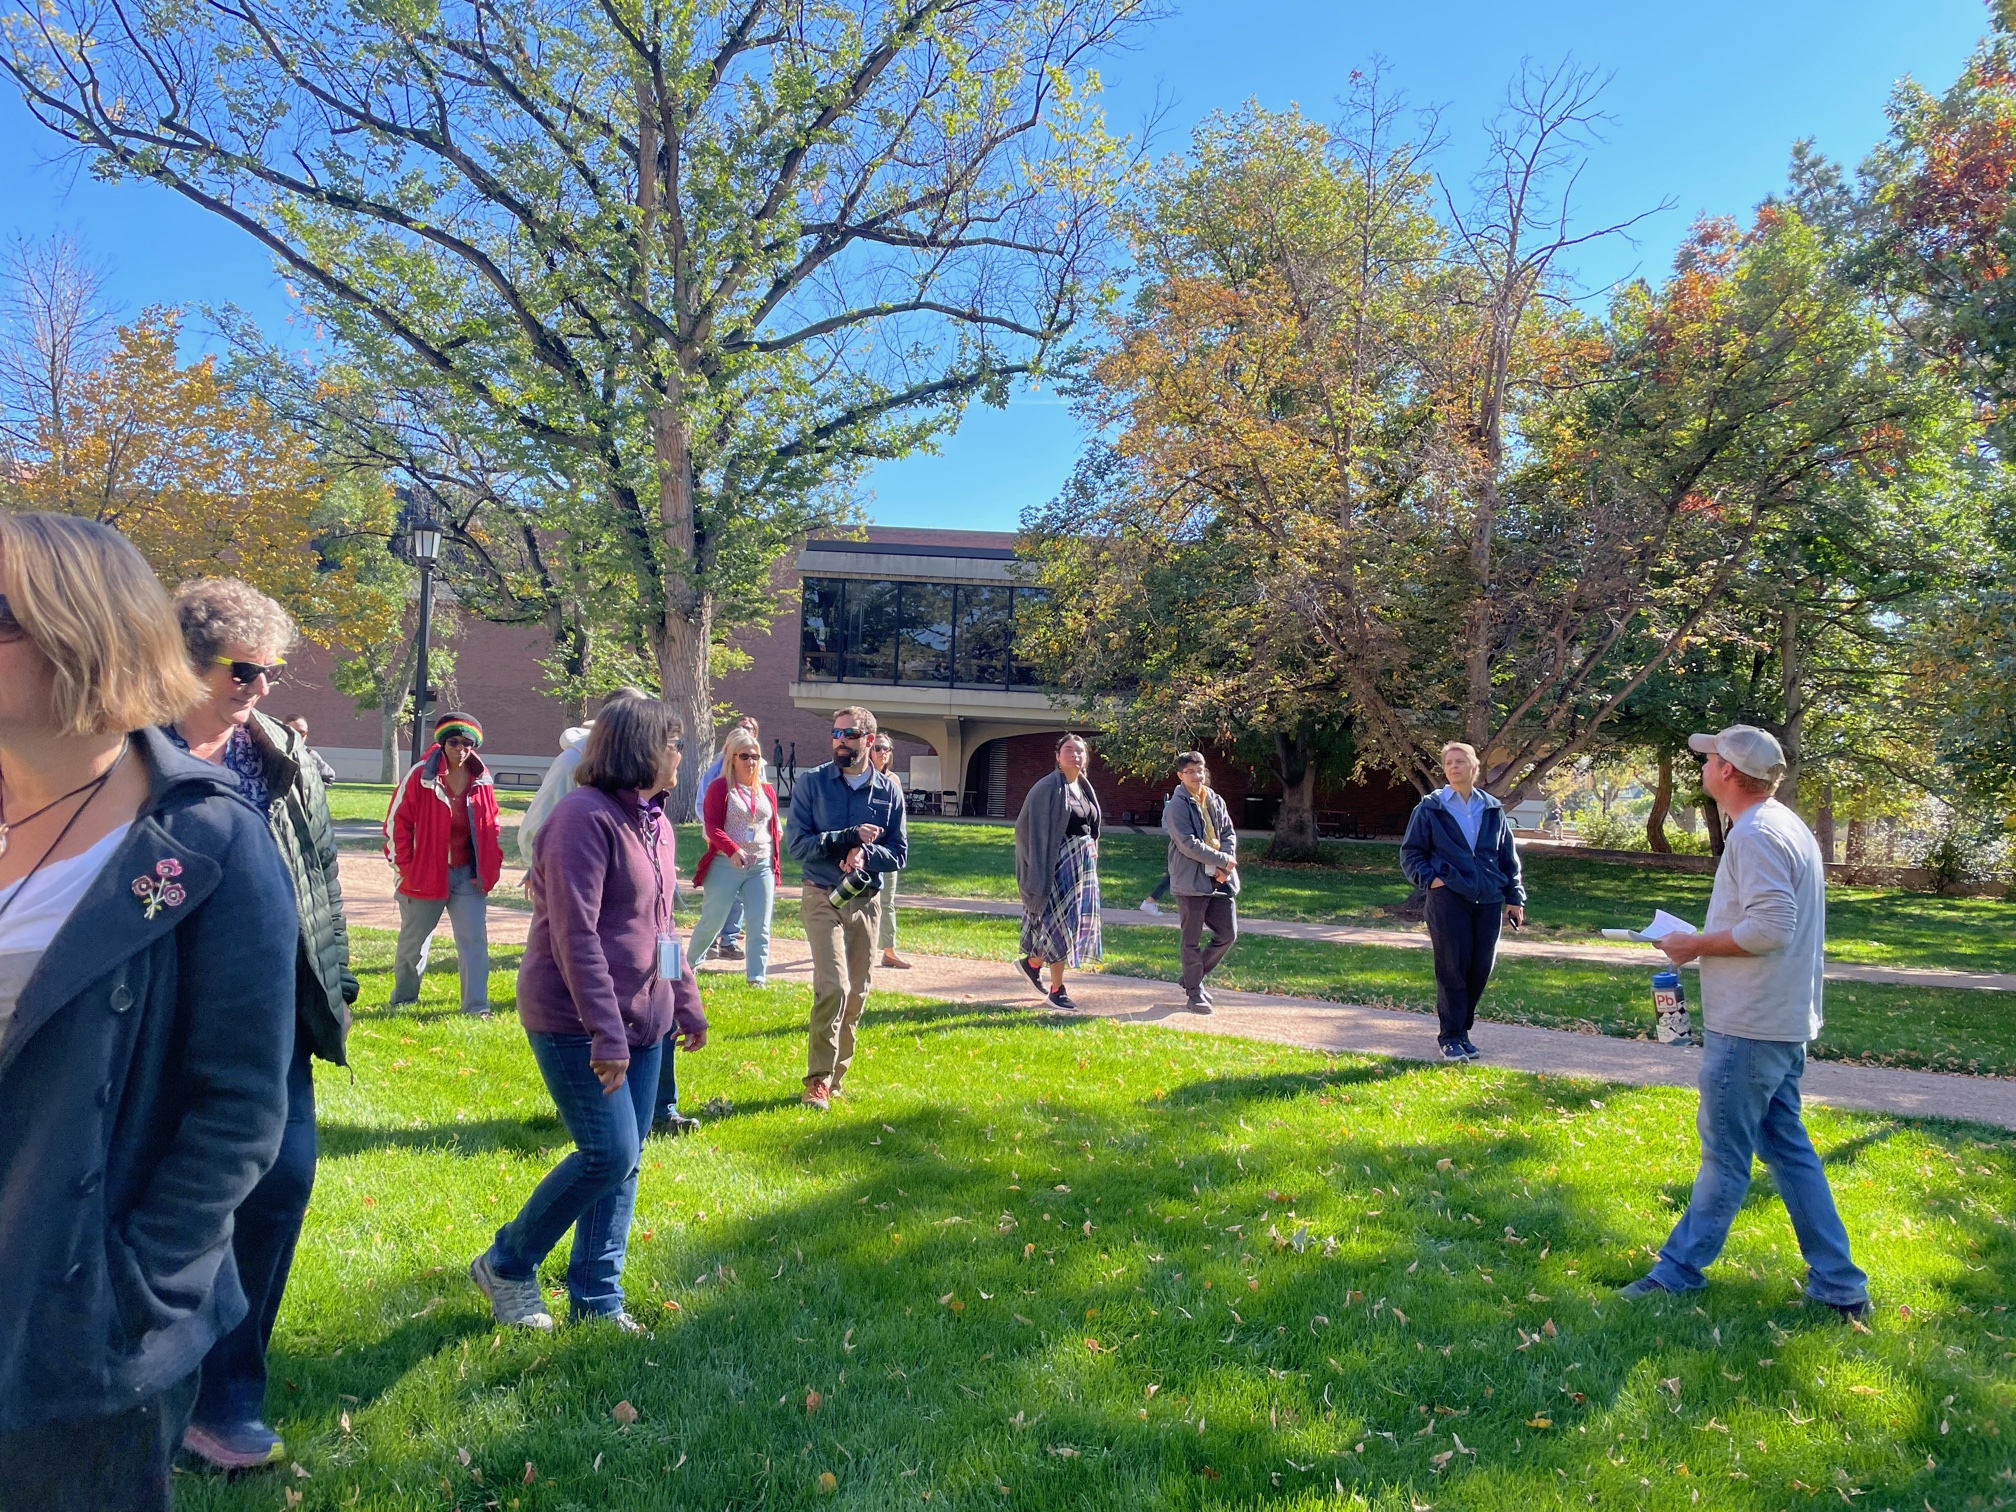 Campus Tree Tour on October 11, 2021. <span class="cc-gallery-credit">[Mae Rohrbach]</span>